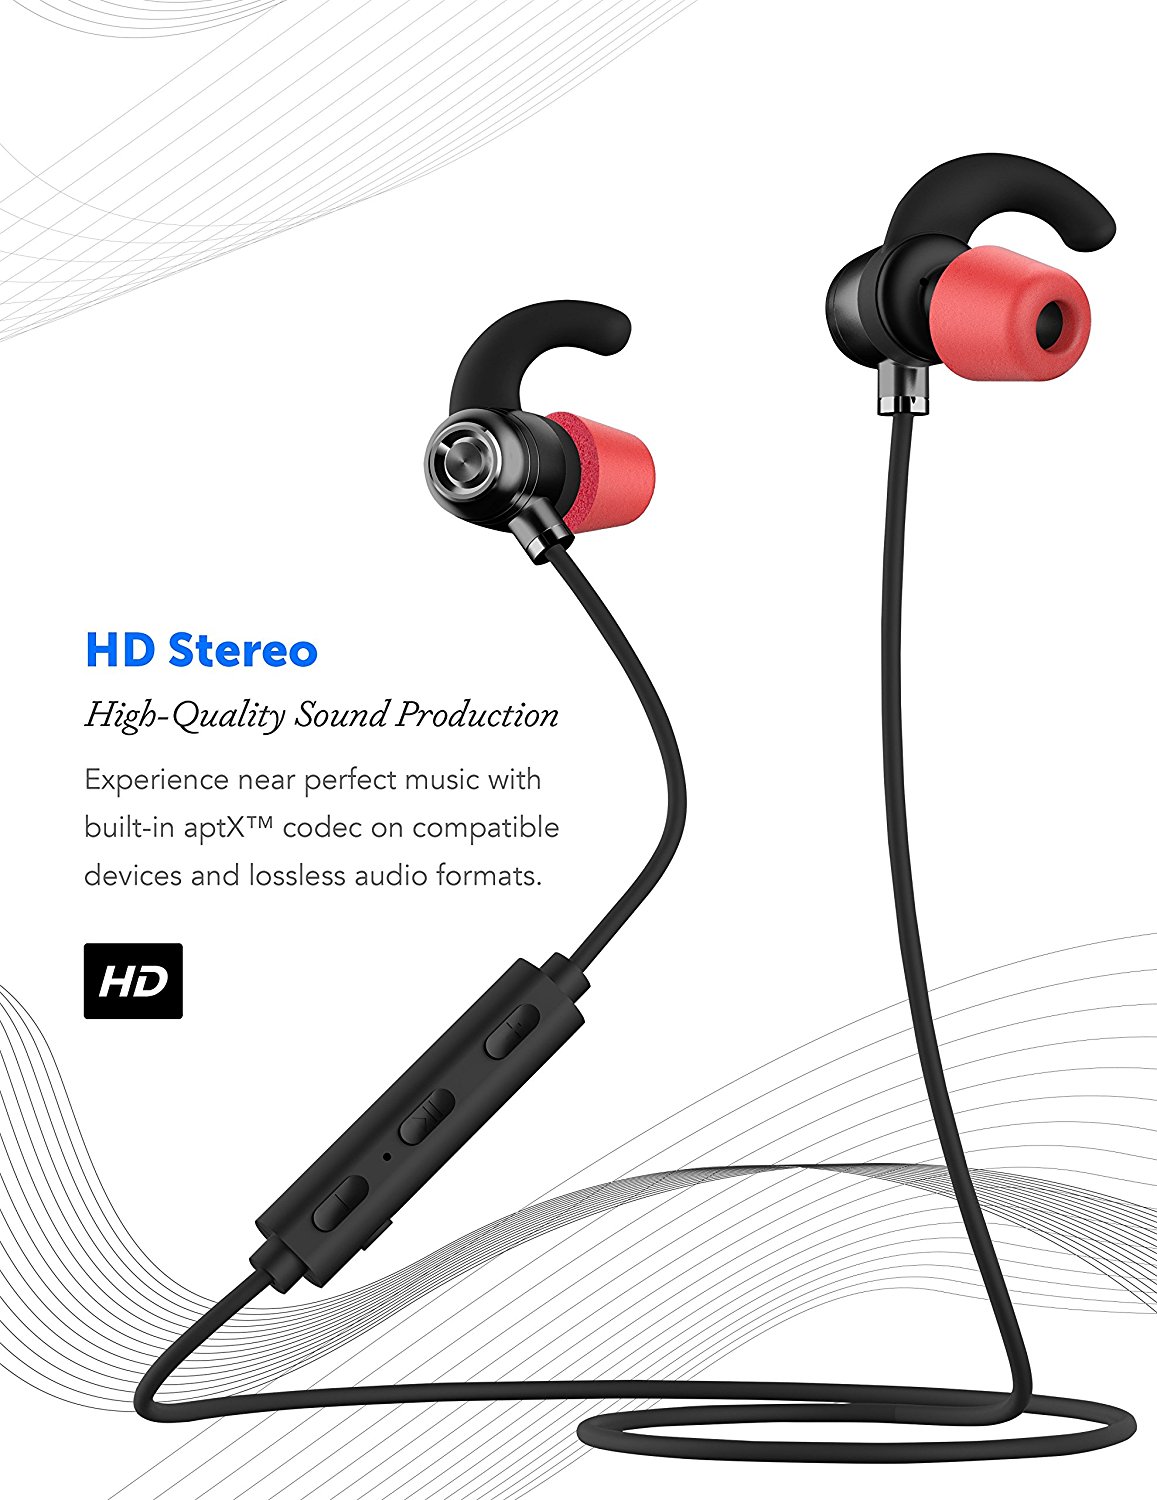 HTC HD7 Bluetooth Headset In-Ear Running Earbuds IPX4 Waterproof with Mic Stereo Earphones, CVC 6.0 Noise Cancellation, works with, Apple, Samsung,Google Pixel,LG - image 2 of 8